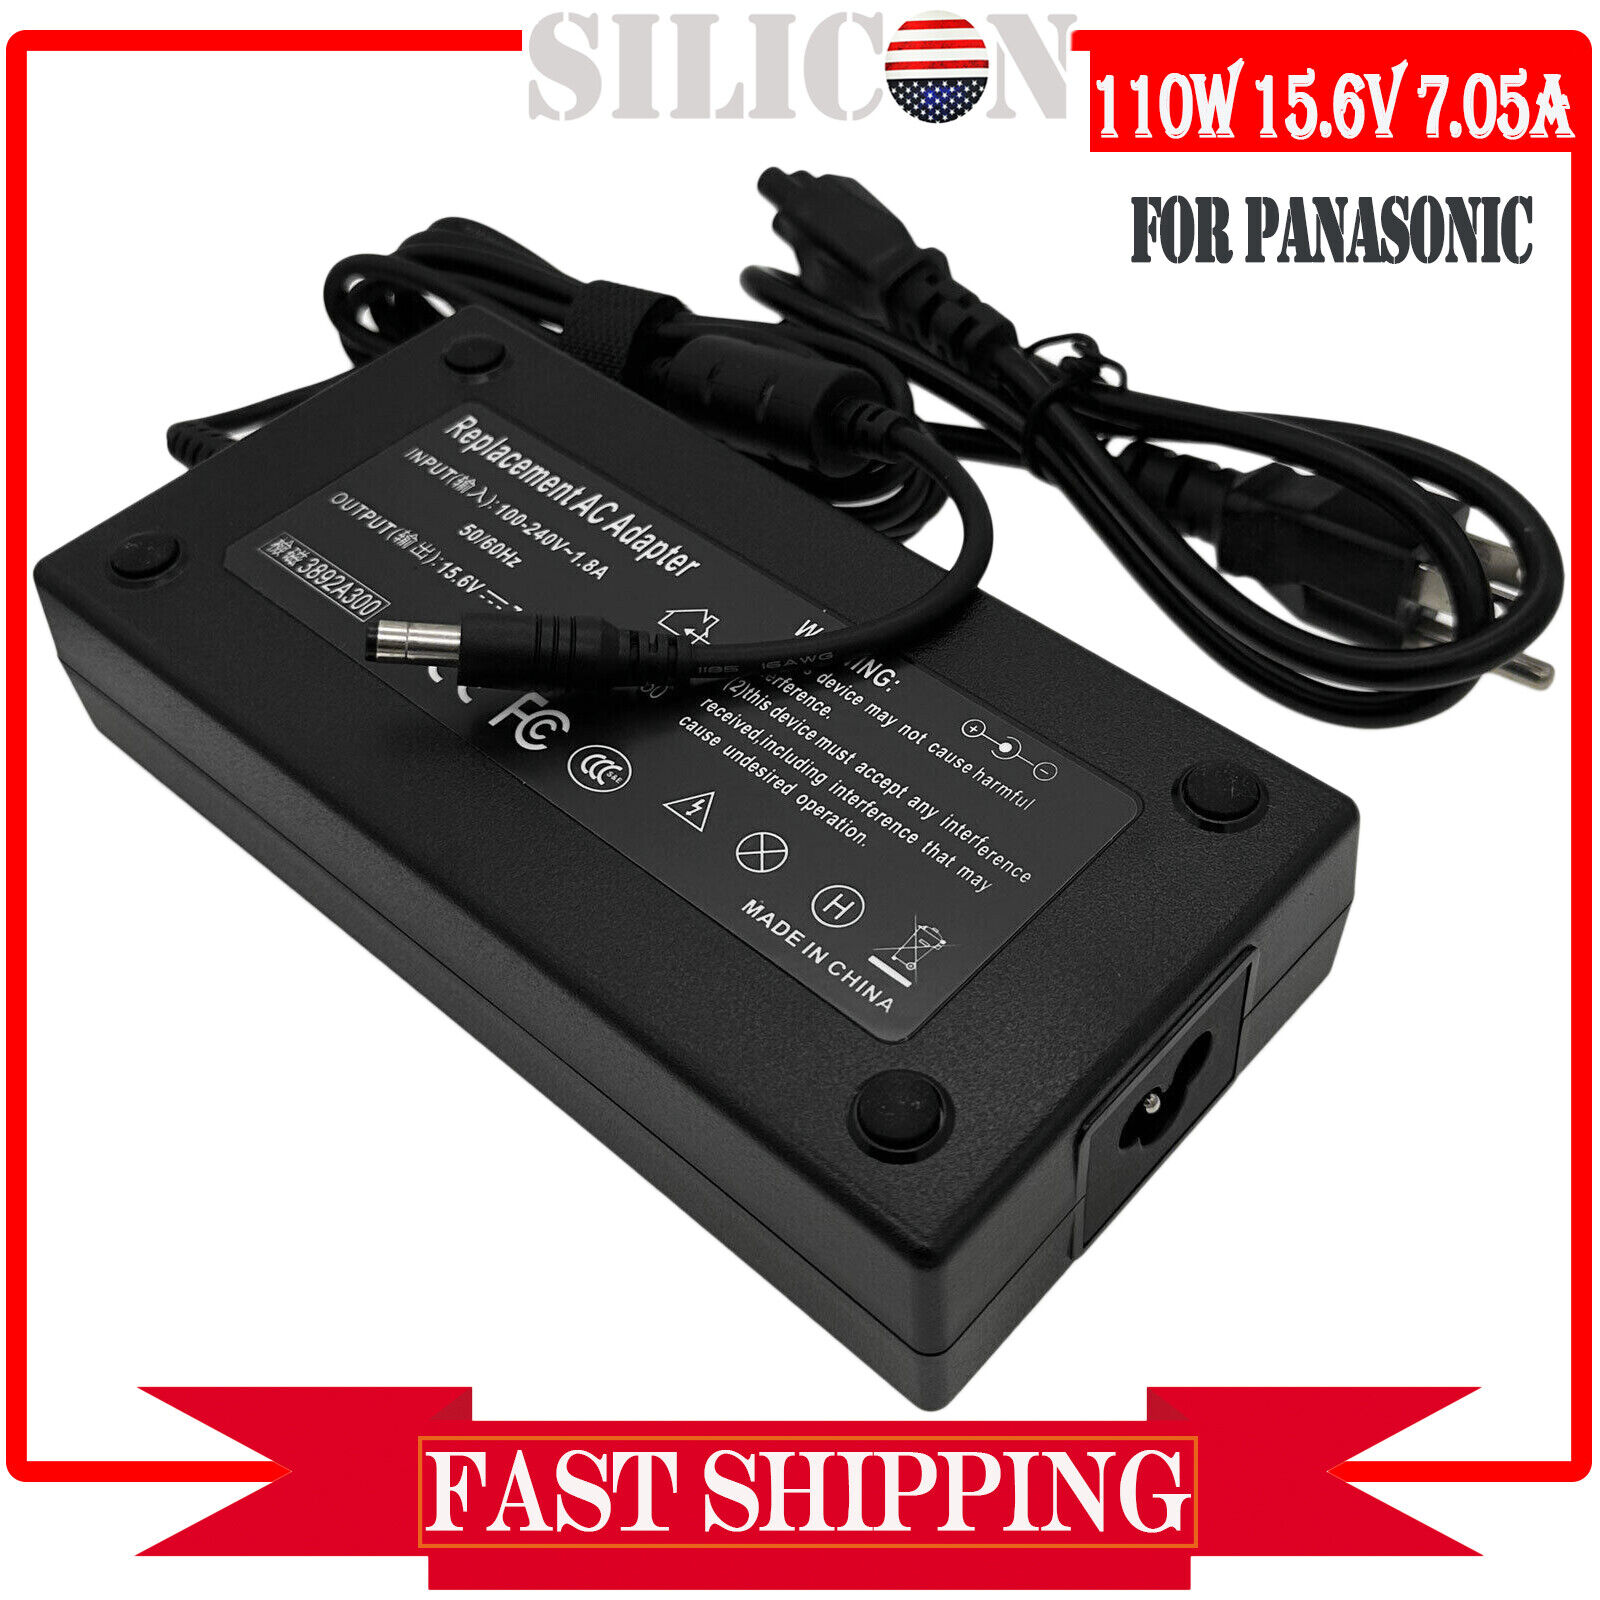 15.6V 7.05A 110W Laptop Adapter for Panasonic Toughbook CF-AA5713A CF-31 CF-53